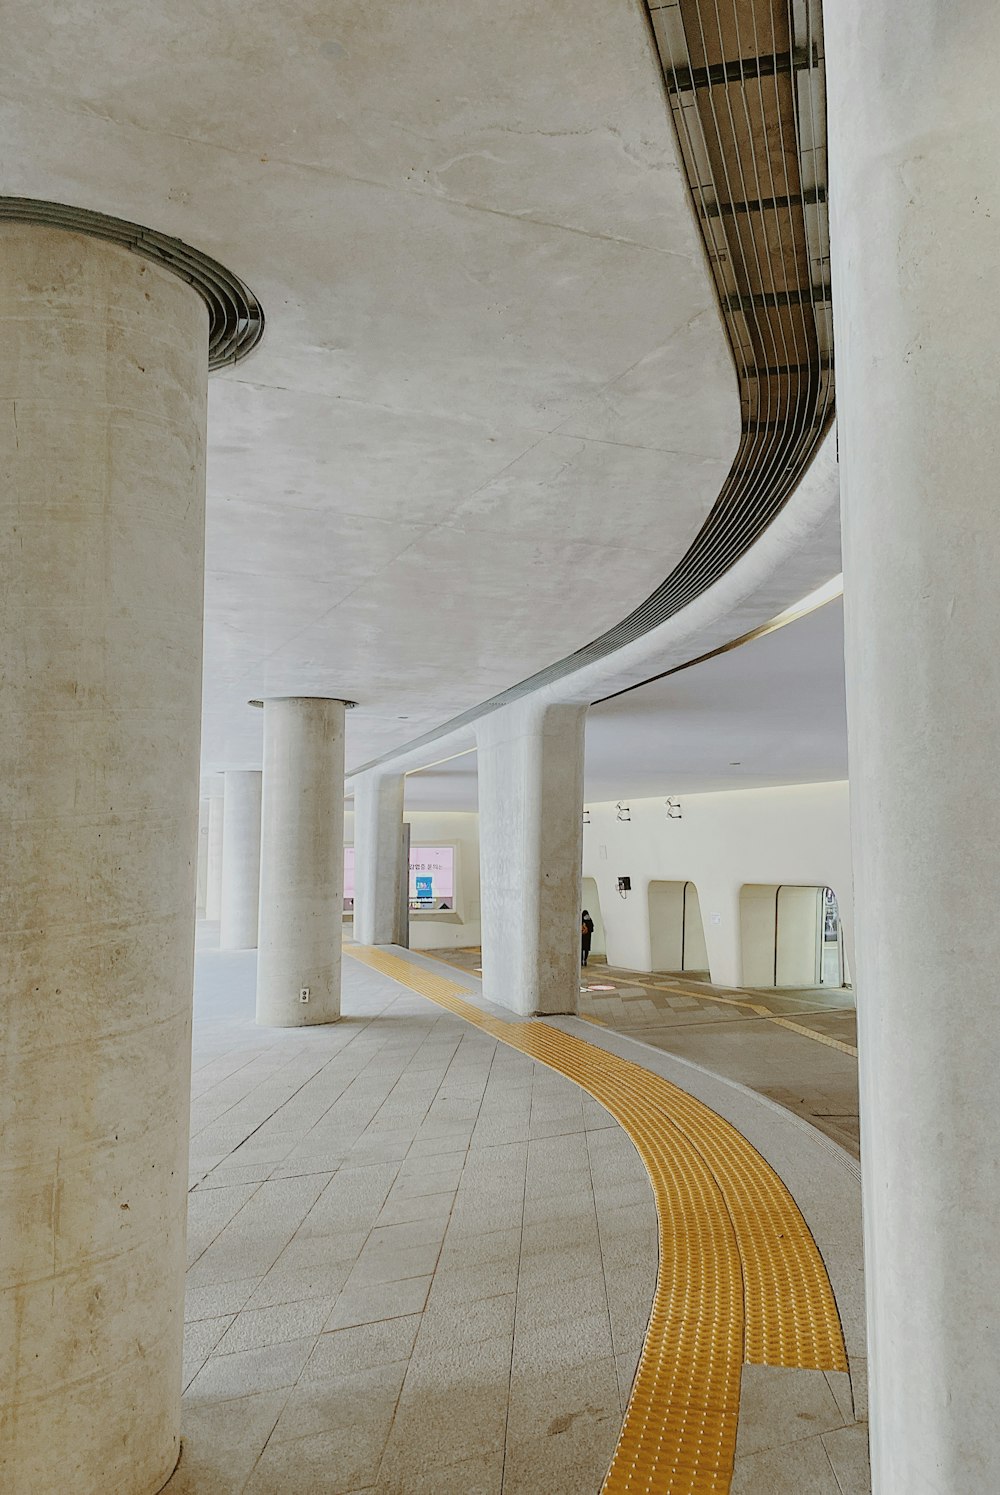 an empty walkway in a large building with columns